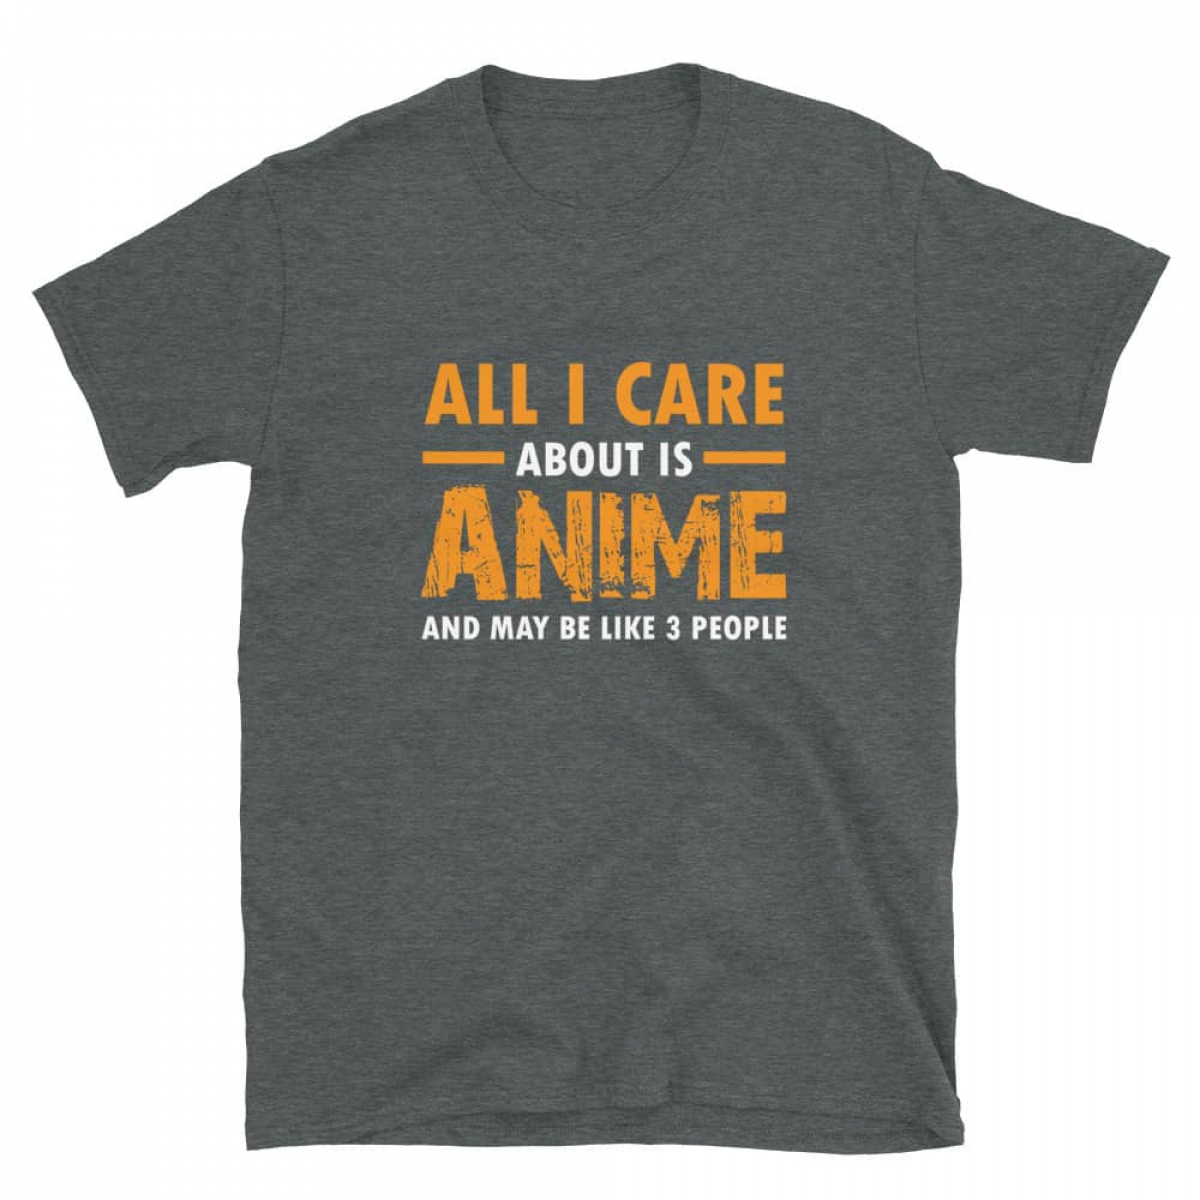 Shop All I Care about is Anime T-shirt anime 3